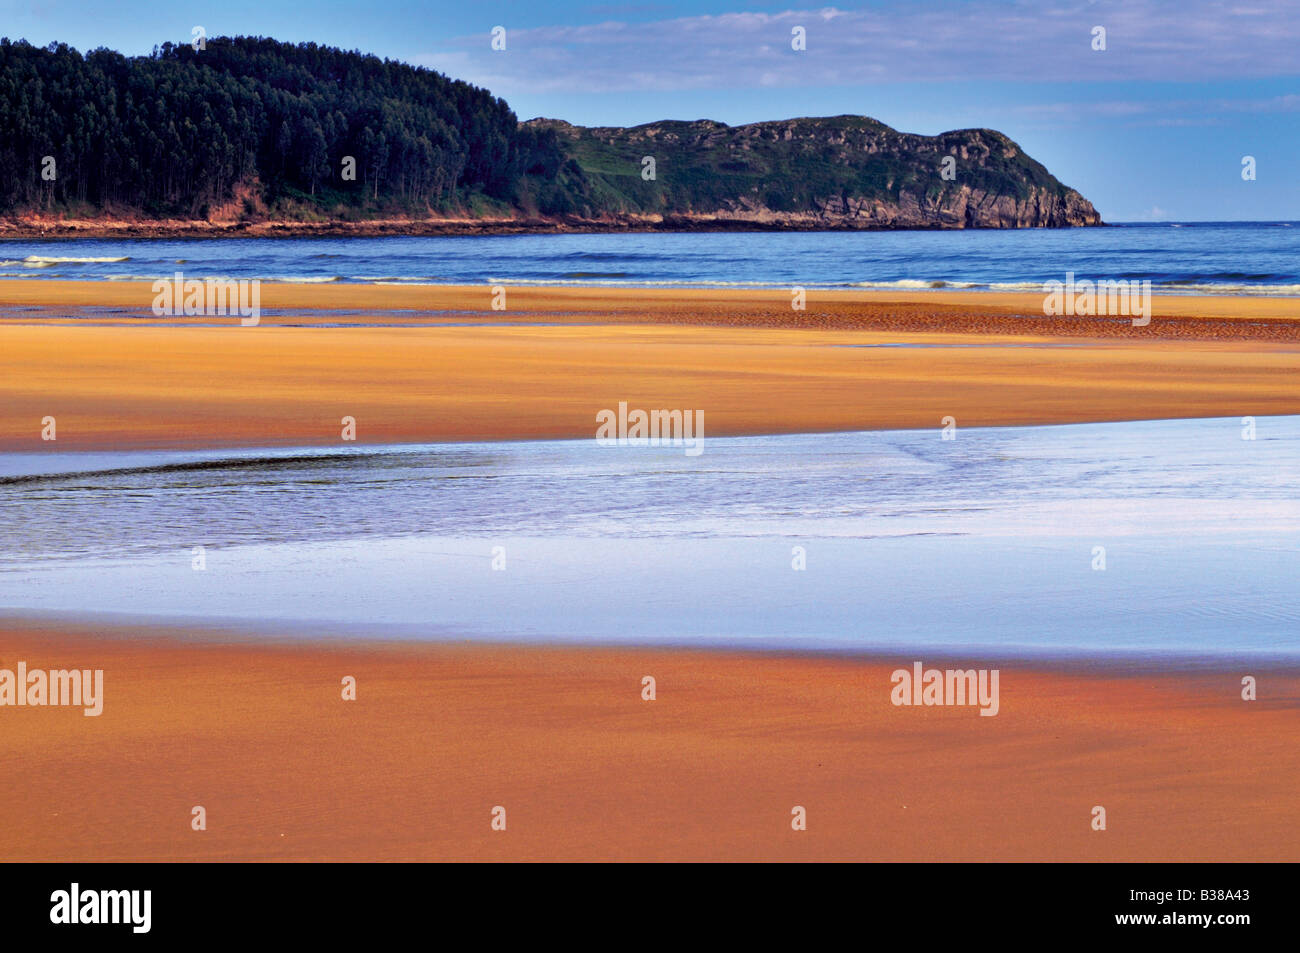 View to beach Playa Oyambre in Cantabria, Spain Stock Photo